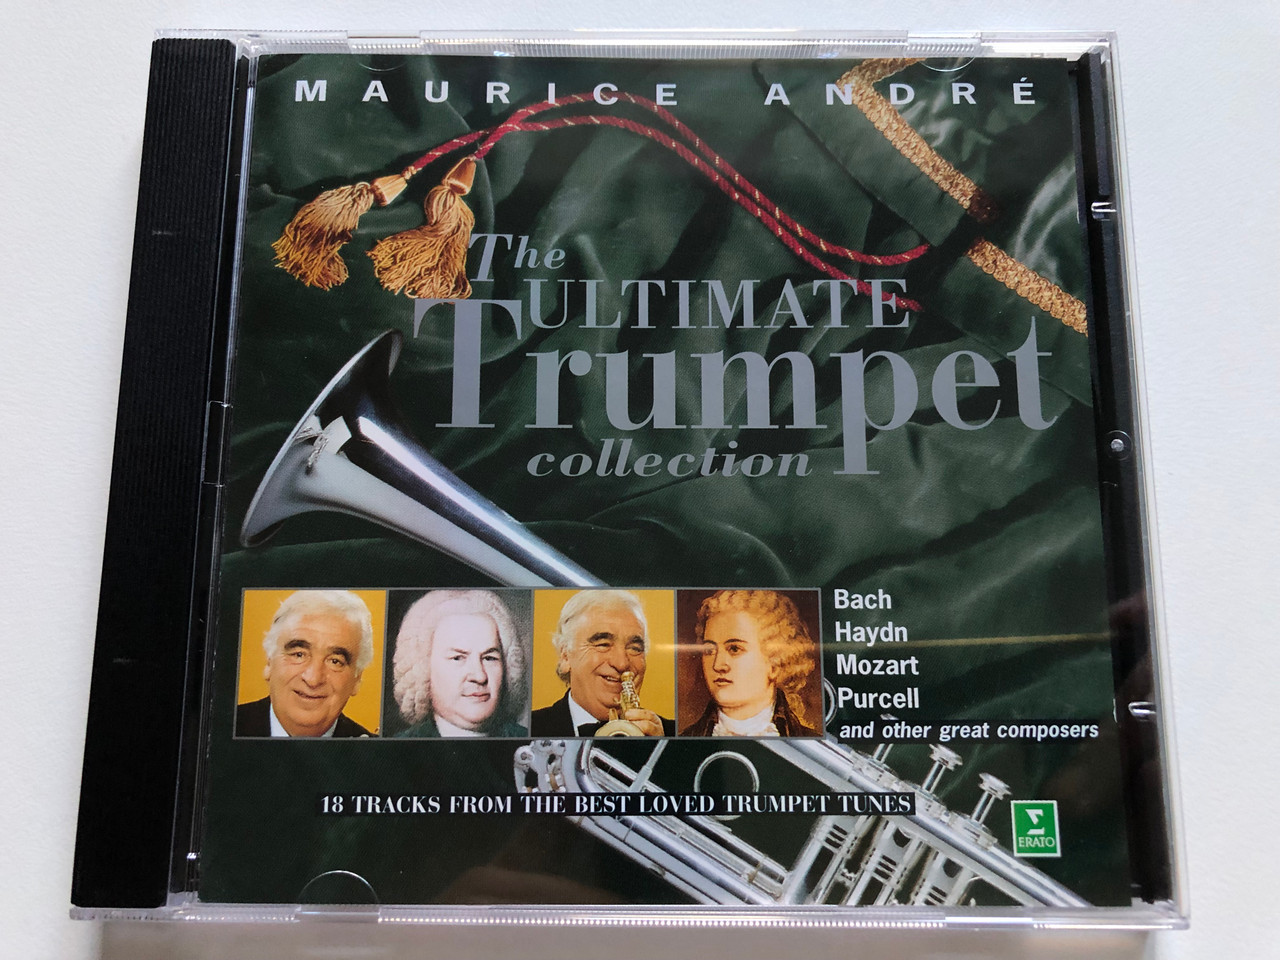 https://cdn10.bigcommerce.com/s-62bdpkt7pb/products/0/images/238651/Maurice_Andr_The_Ultimate_Trumpet_Collection_Bach_Haydn_Mozart_Purcell_and_others_great_composers_18_Tracks_From_The_Best_Loved_Trumpet_Tunes_Erato_Audio_CD_4509-92861-2_1__09219.1657780300.1280.1280.JPG?c=2&_gl=1*lnne9c*_ga*MjA2NTIxMjE2MC4xNTkwNTEyNTMy*_ga_WS2VZYPC6G*MTY1Nzc3OTYzMS40ODIuMS4xNjU3Nzc5OTc1LjEx